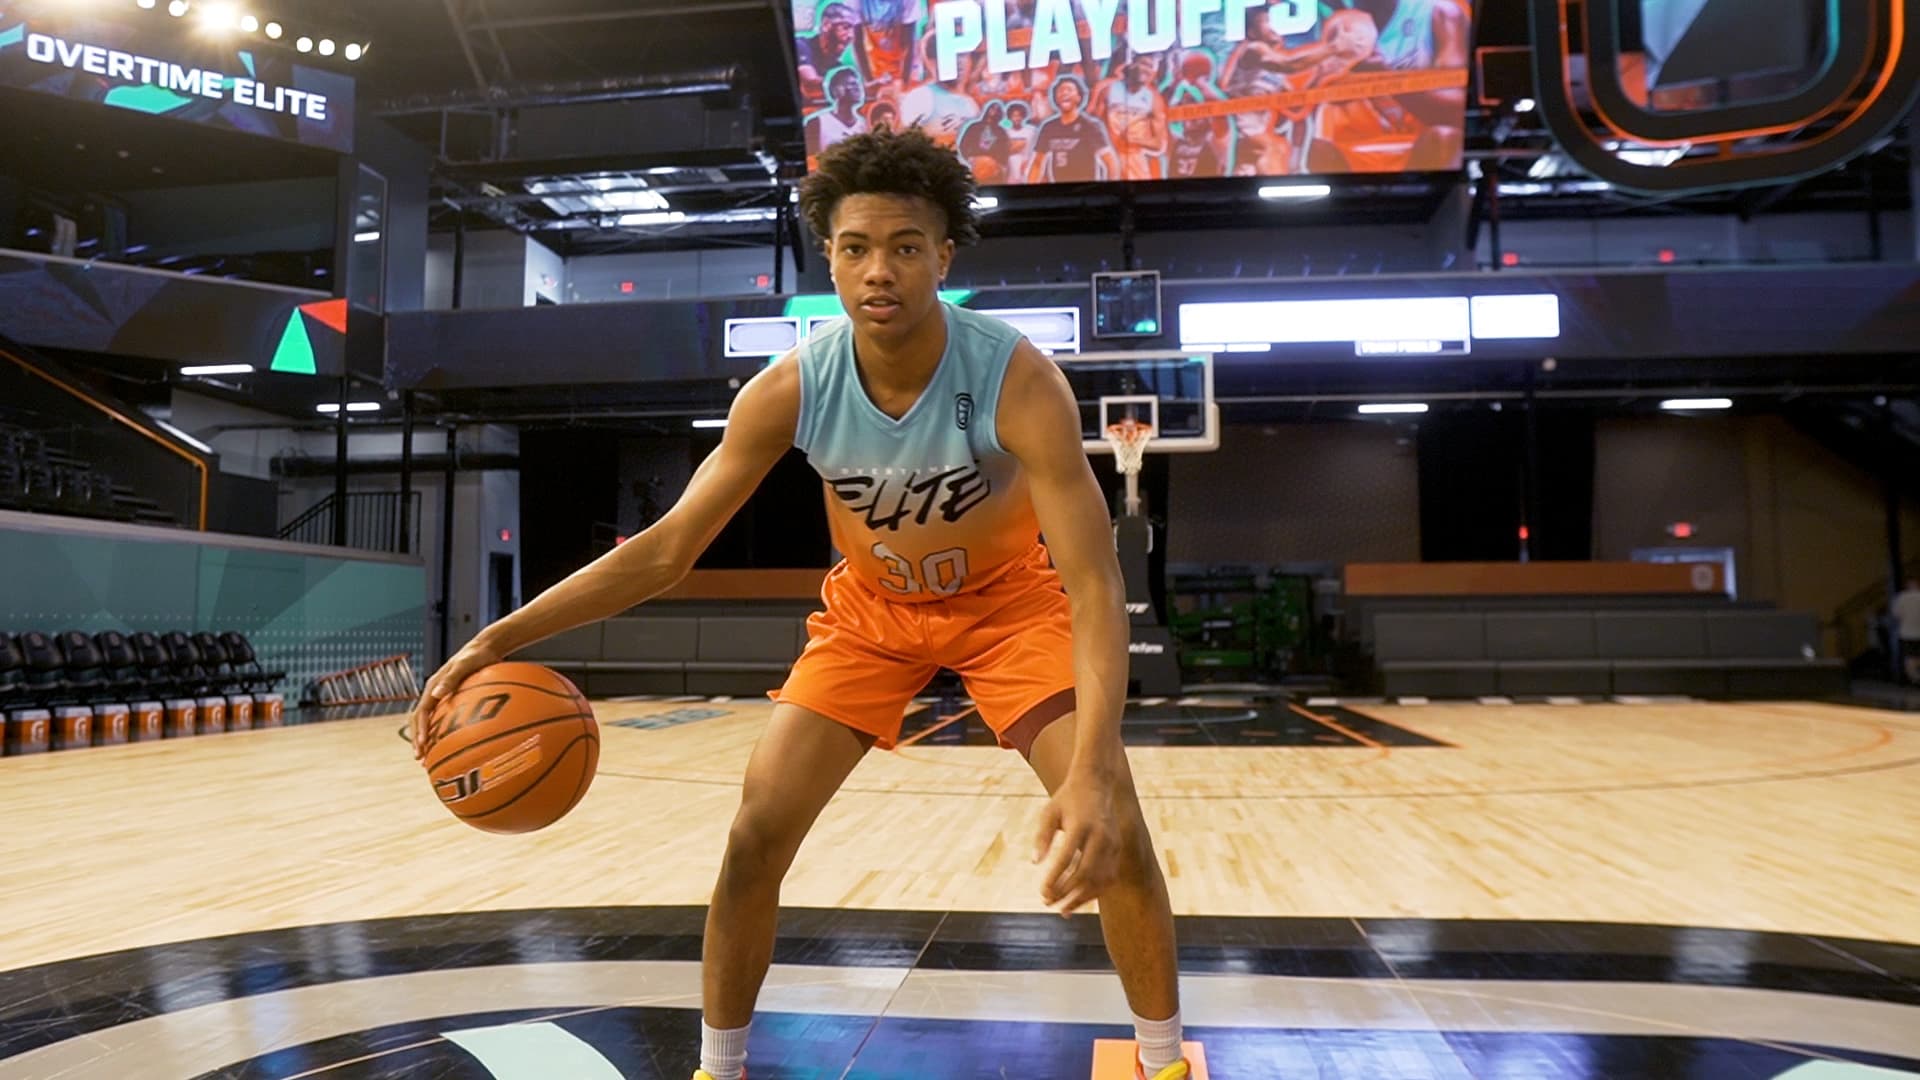 Bryson Warren, a 17-year-old professional high school athlete, dribbles a basketball in the Overtime Elite arena in Atlanta.